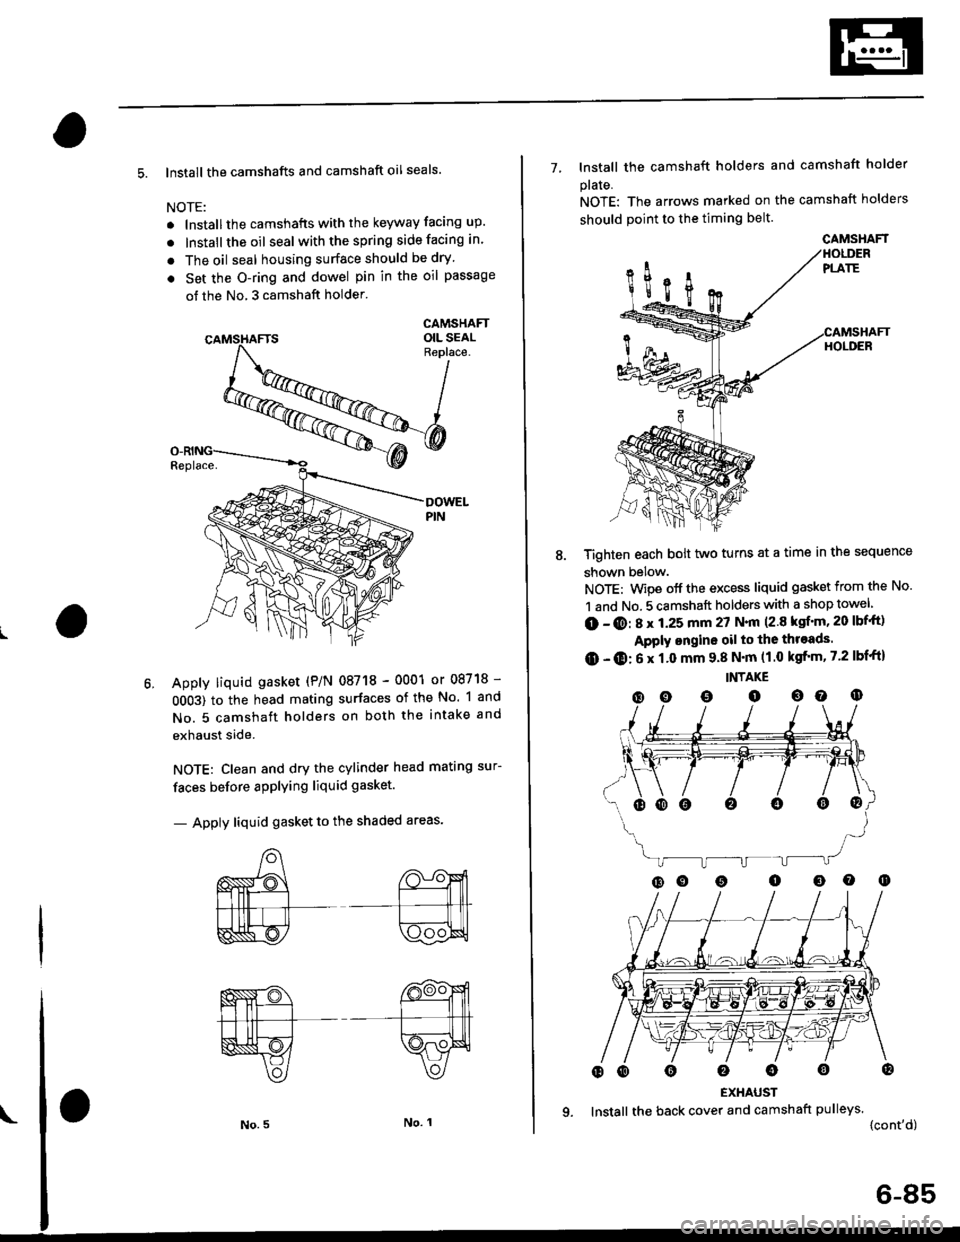 HONDA CIVIC 1997 6.G Workshop Manual 5. lnstall the camshafts and camshaft oil seals.
NOTE:
. lnstallthe camshafts with the keyway facing up.
. lnstall the oil seal withthespring side facing in.
. The oil seal housing surface should be d